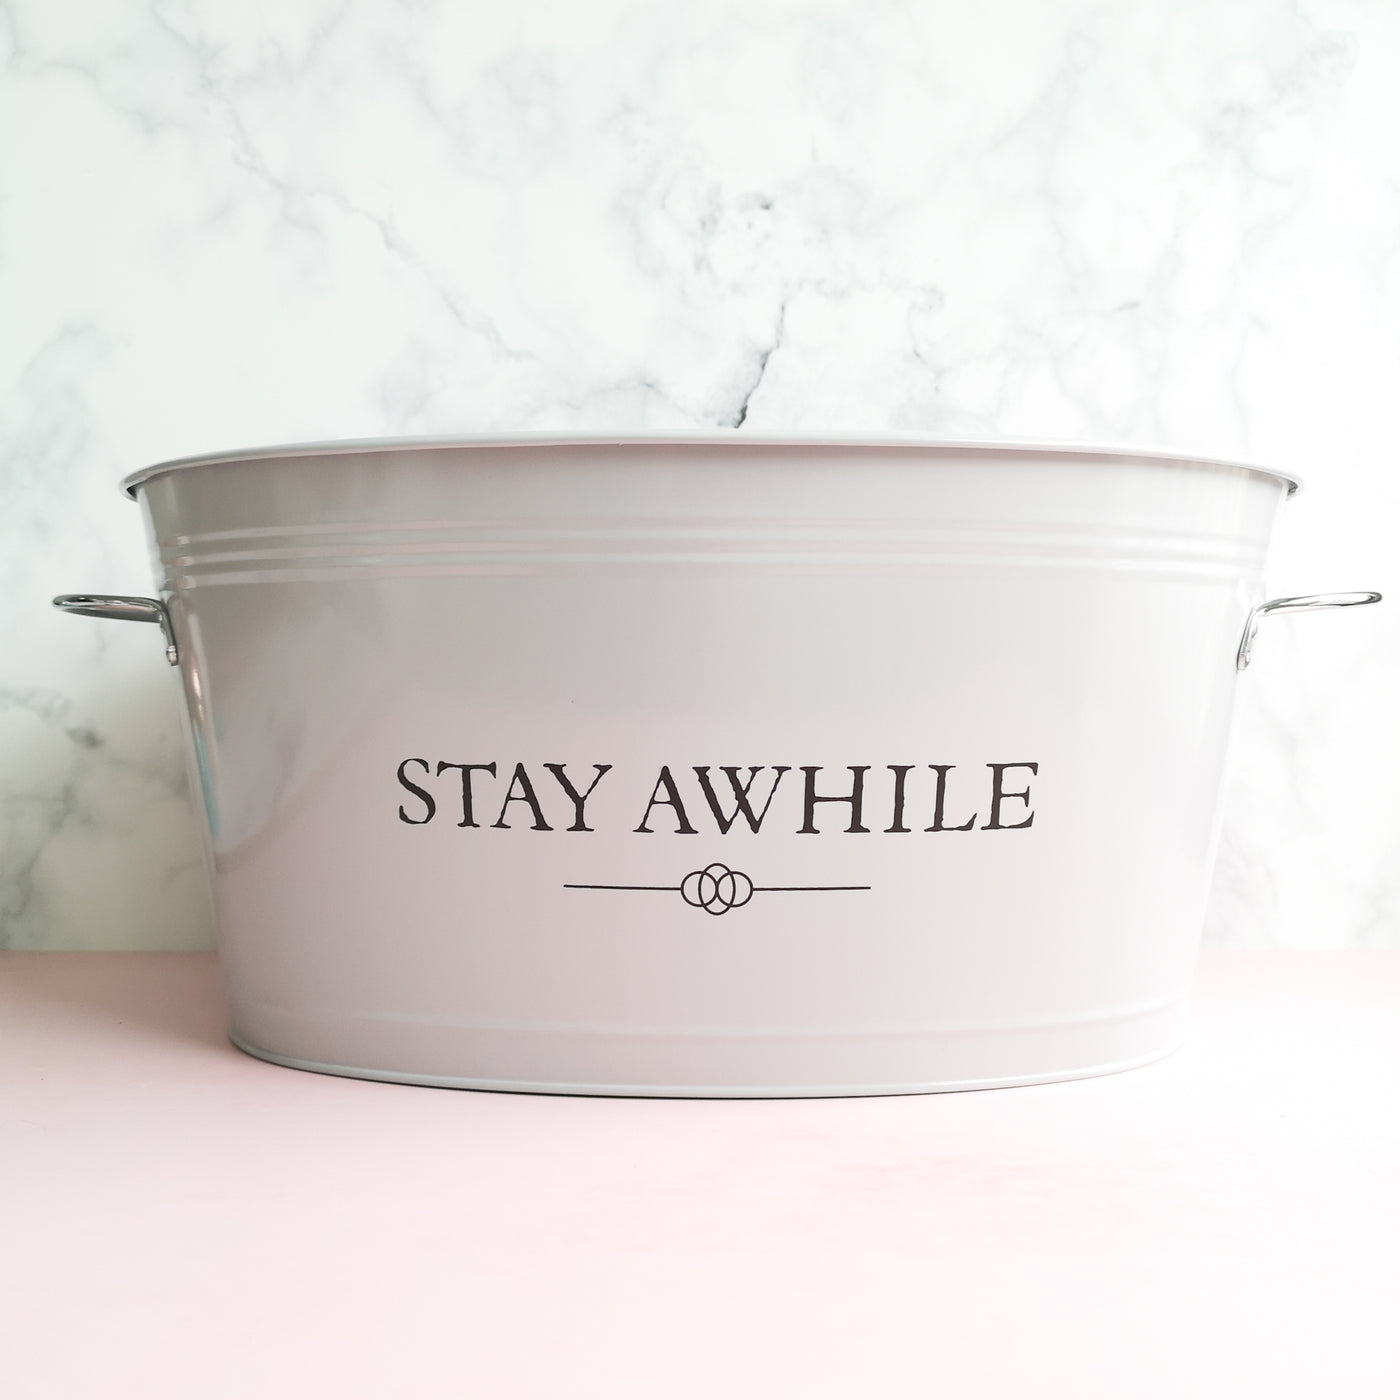 Stay Awhile Drink Tub